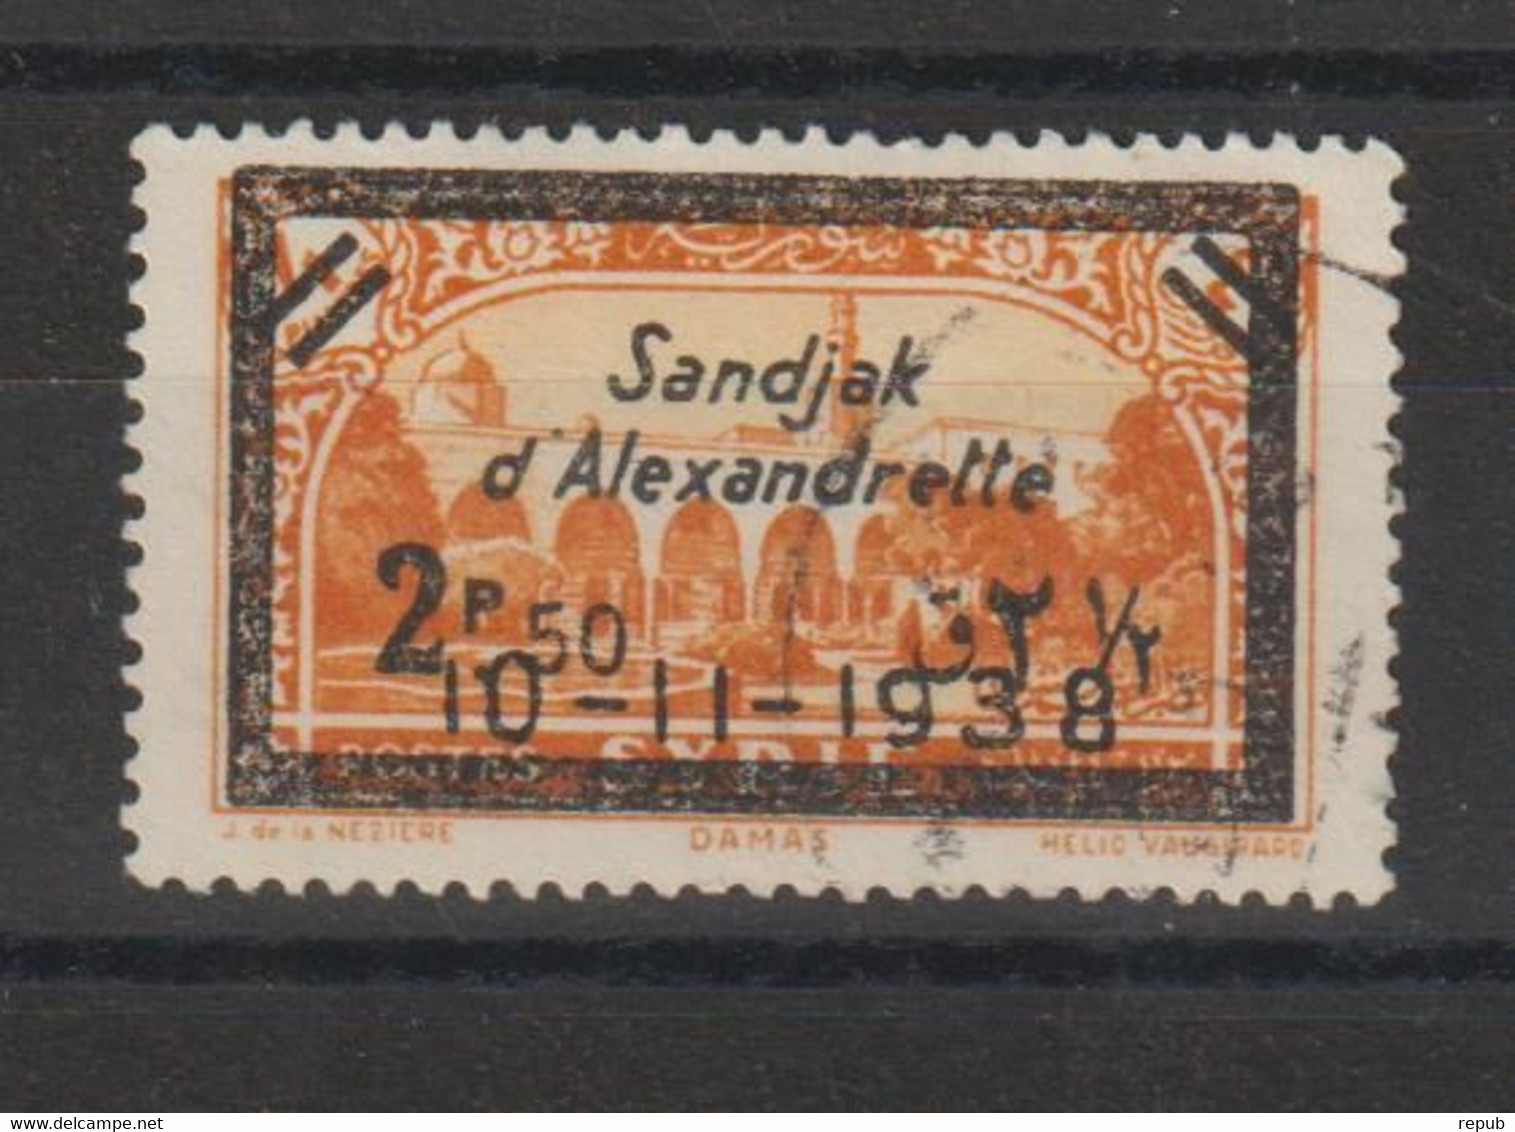 Alexandrette 1938 Timbres De Deuil 15, 1 Val Oblit Used - Used Stamps